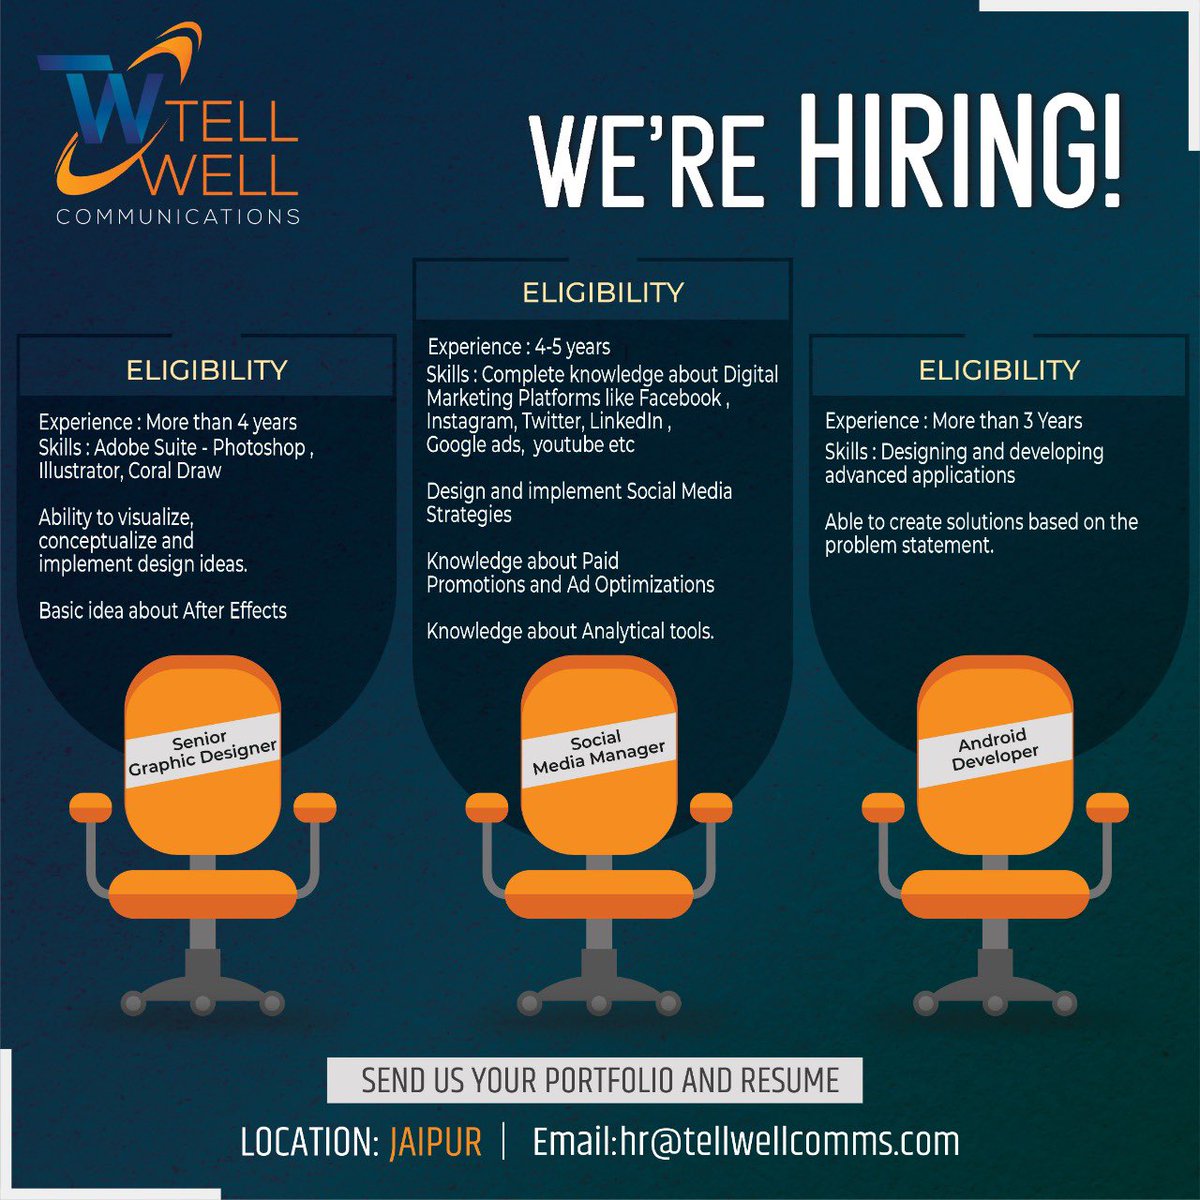 HIRING ALERT
If you think you are creative enough to work with us, mail us your CV at hr@tellwellcomms.com

#hiring #graphicdesigner #androiddeveloper #jobs #socialmediamanager #digitalmarketing #instagrammanager #facebook #twitter #socialmediamarketing